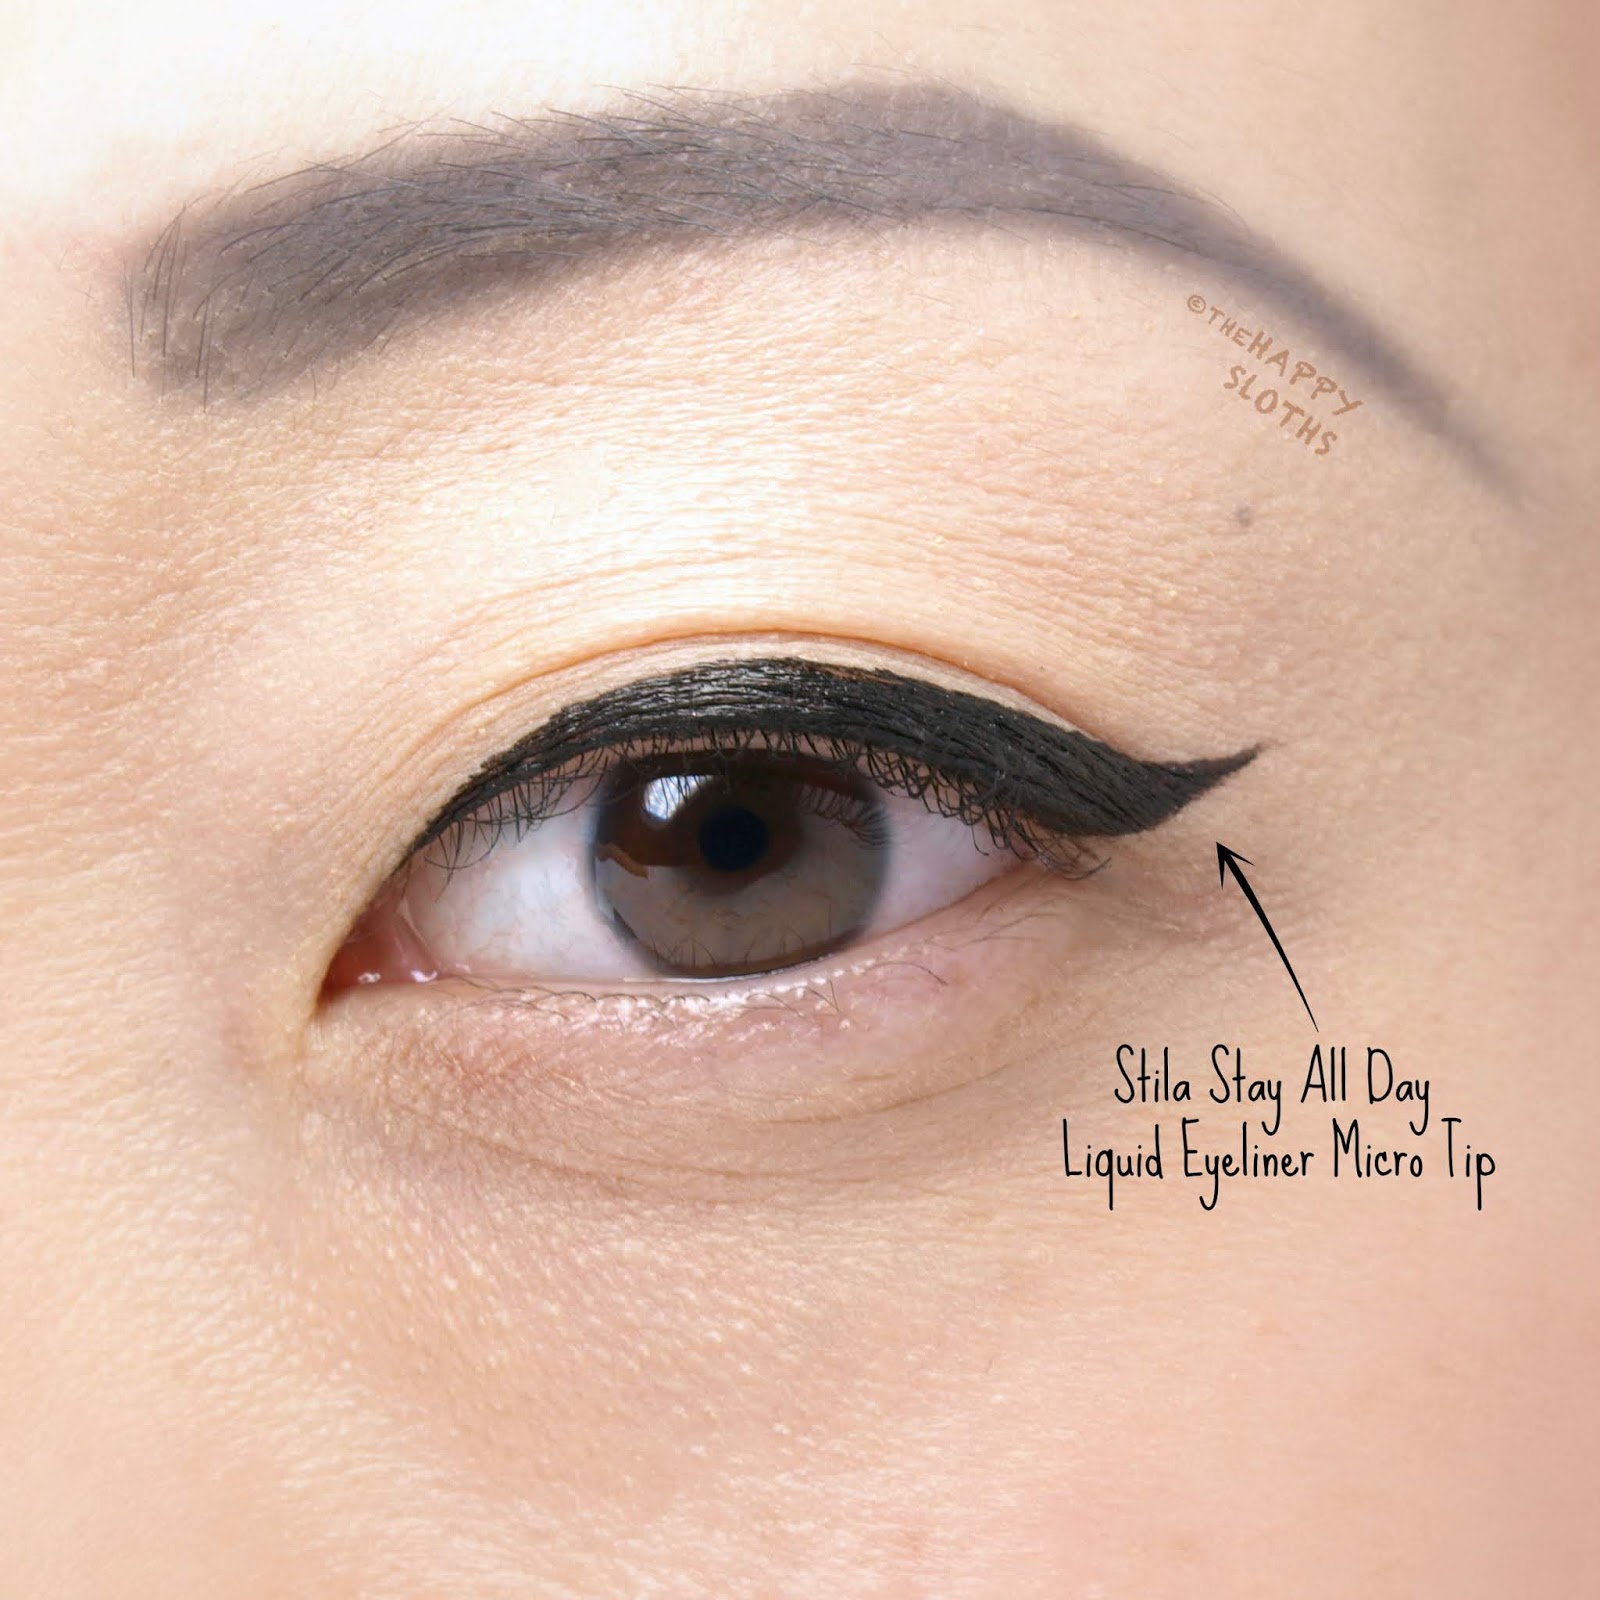 Stila | Stay All Day Waterproof Liquid Eye Liner - Micro Tip: Review and Swatches